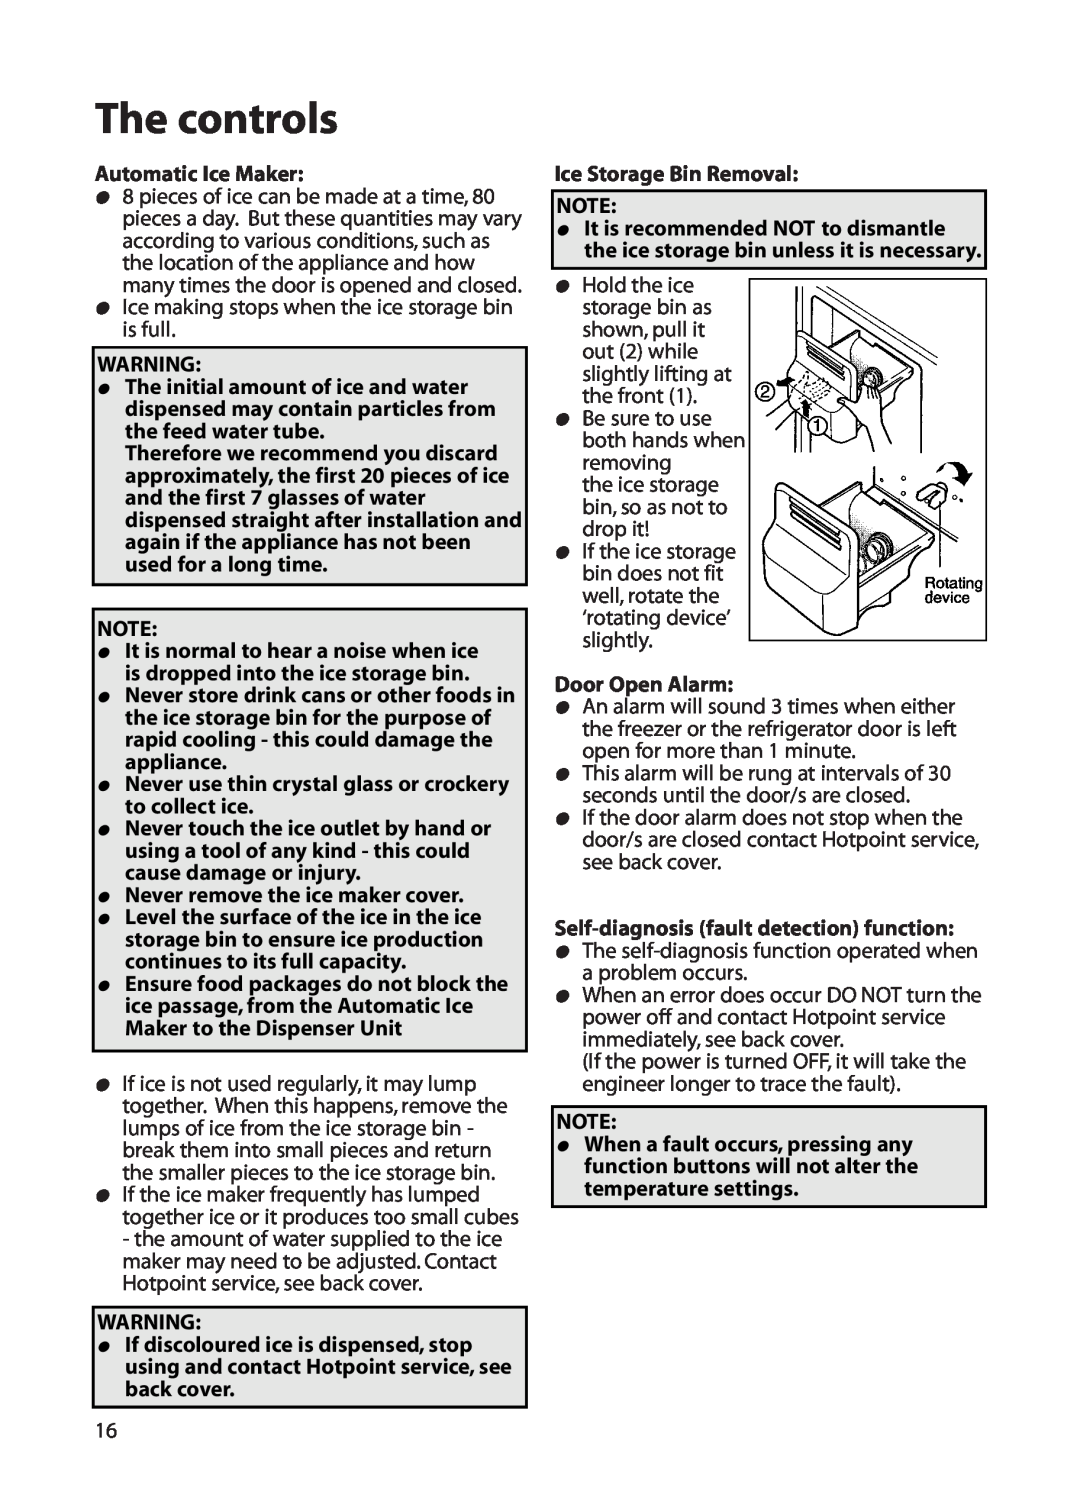 Hotpoint FFU00 manual The controls, Automatic Ice Maker 